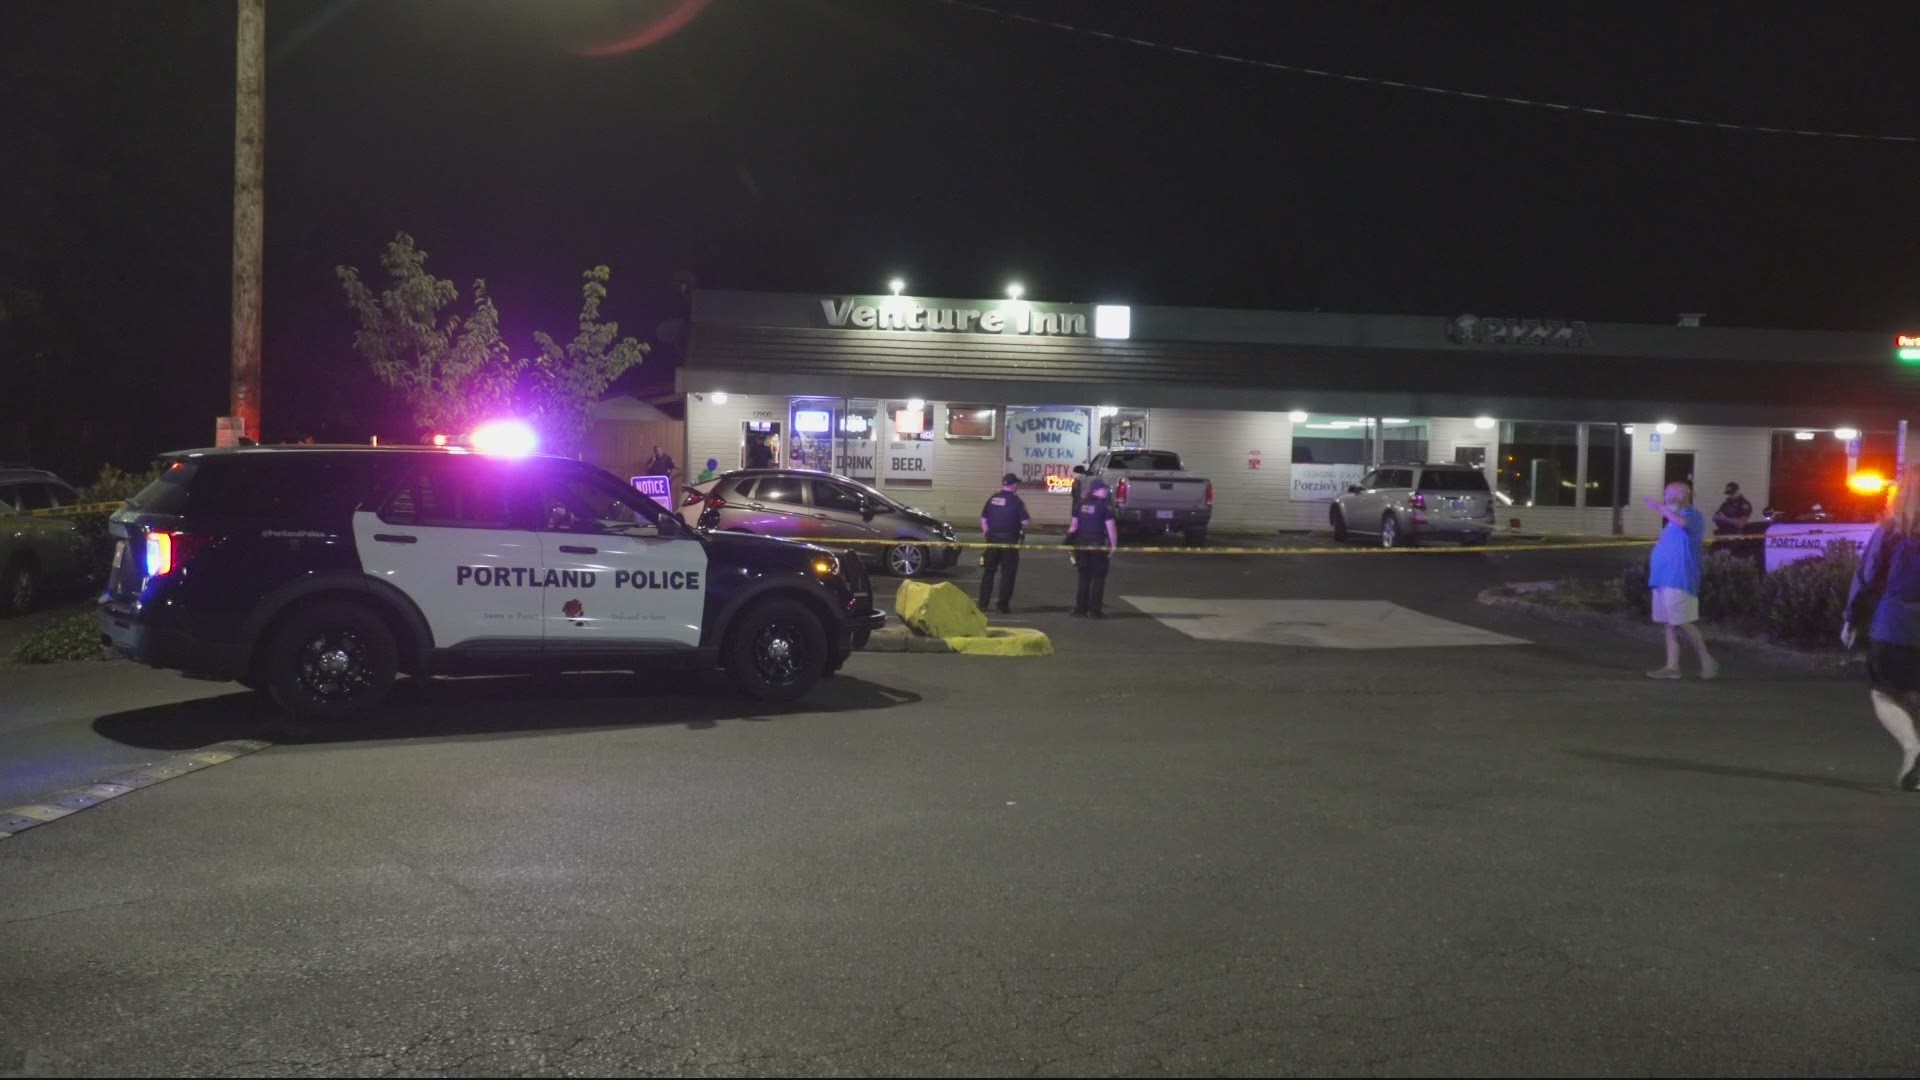 Police said a man shot three people inside the Venture Inn bar Thursday night. No arrests have been made.